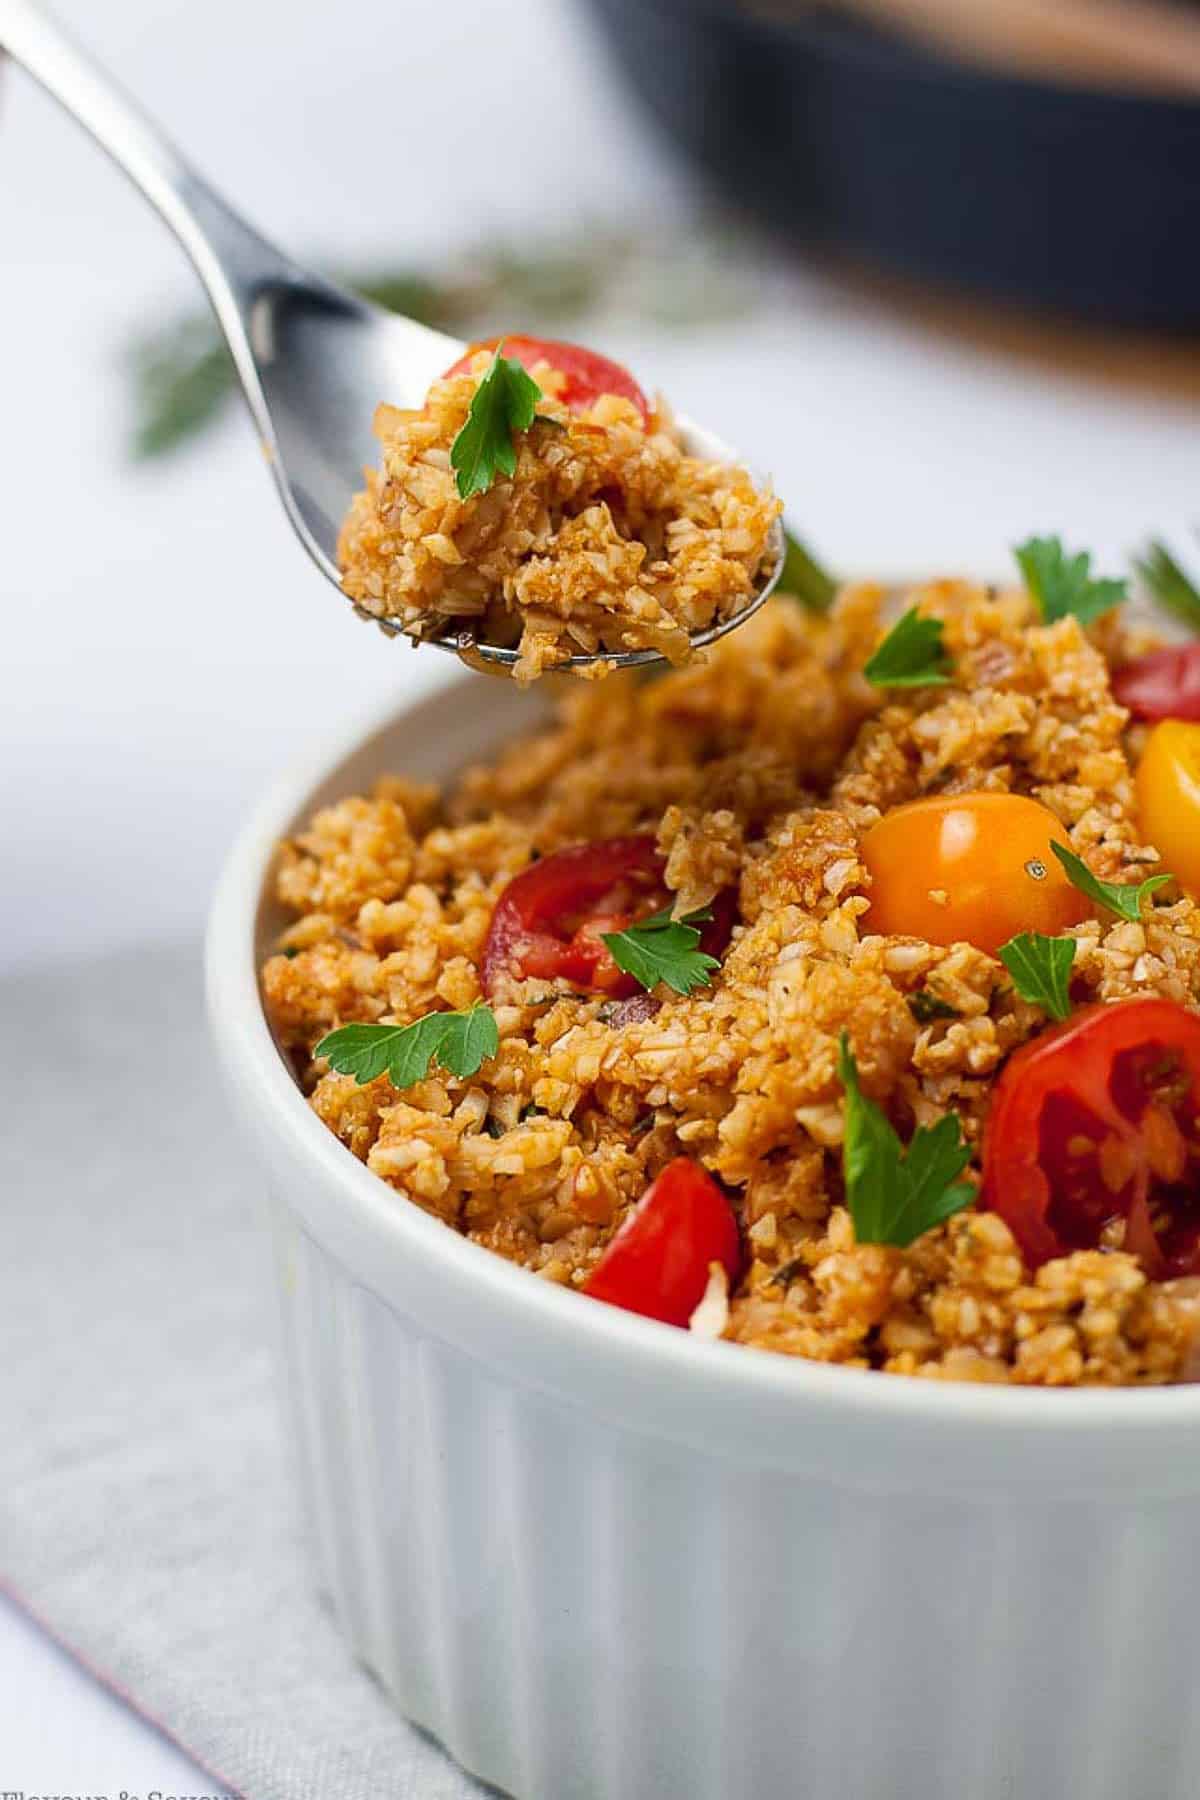 A spoonful of Spanish-style cauliflower rice.